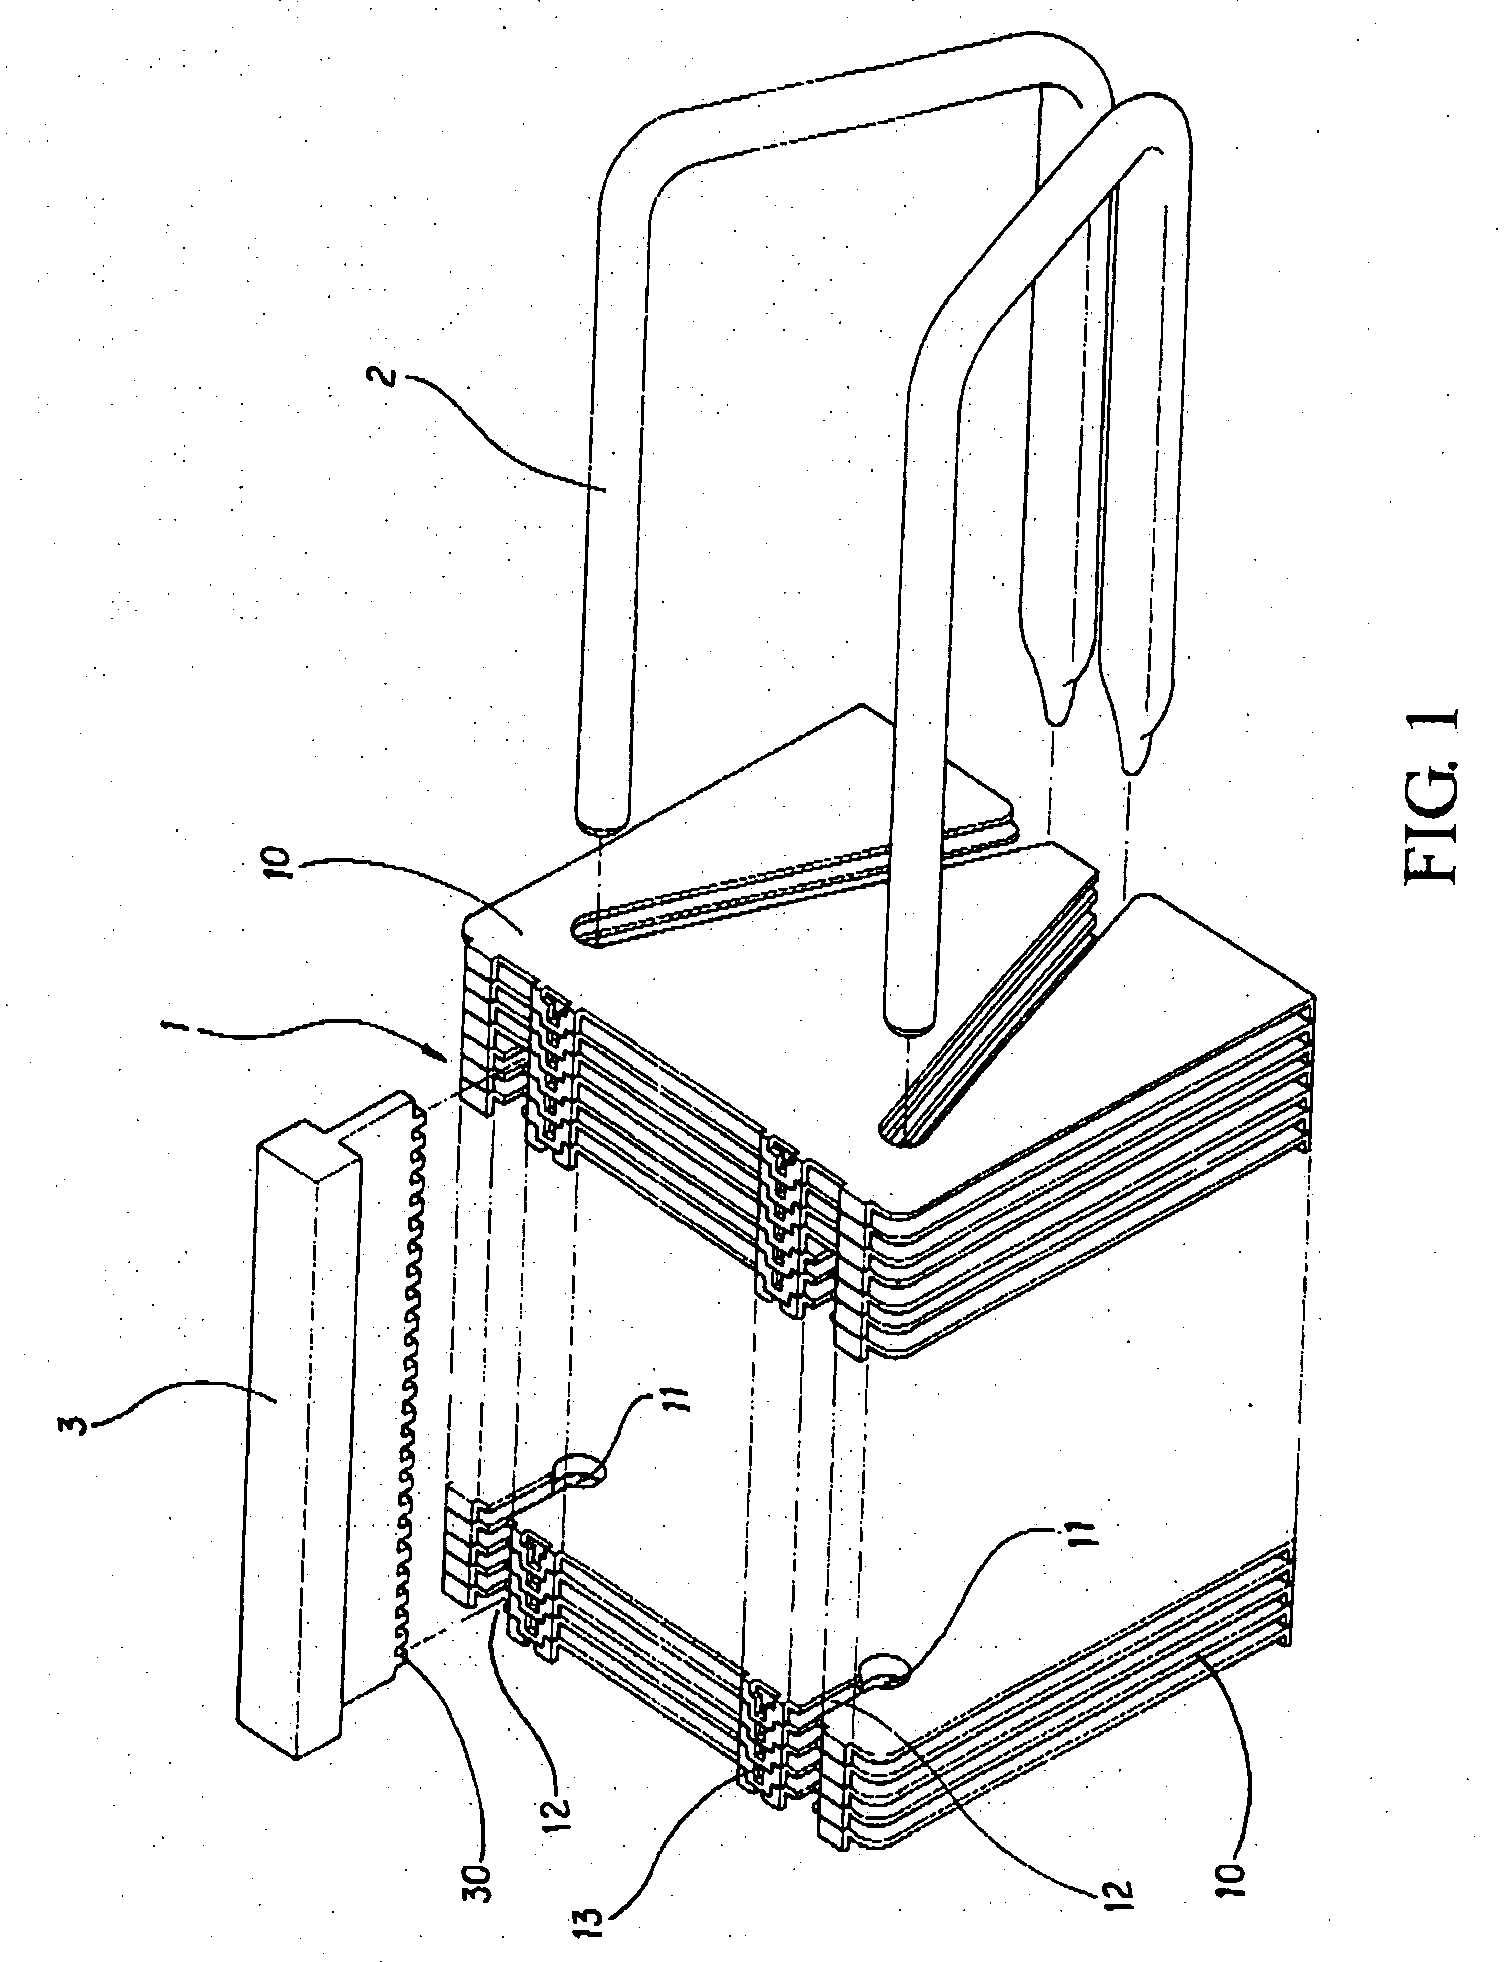 Fastening structure for combining heat conducting pipe and fins